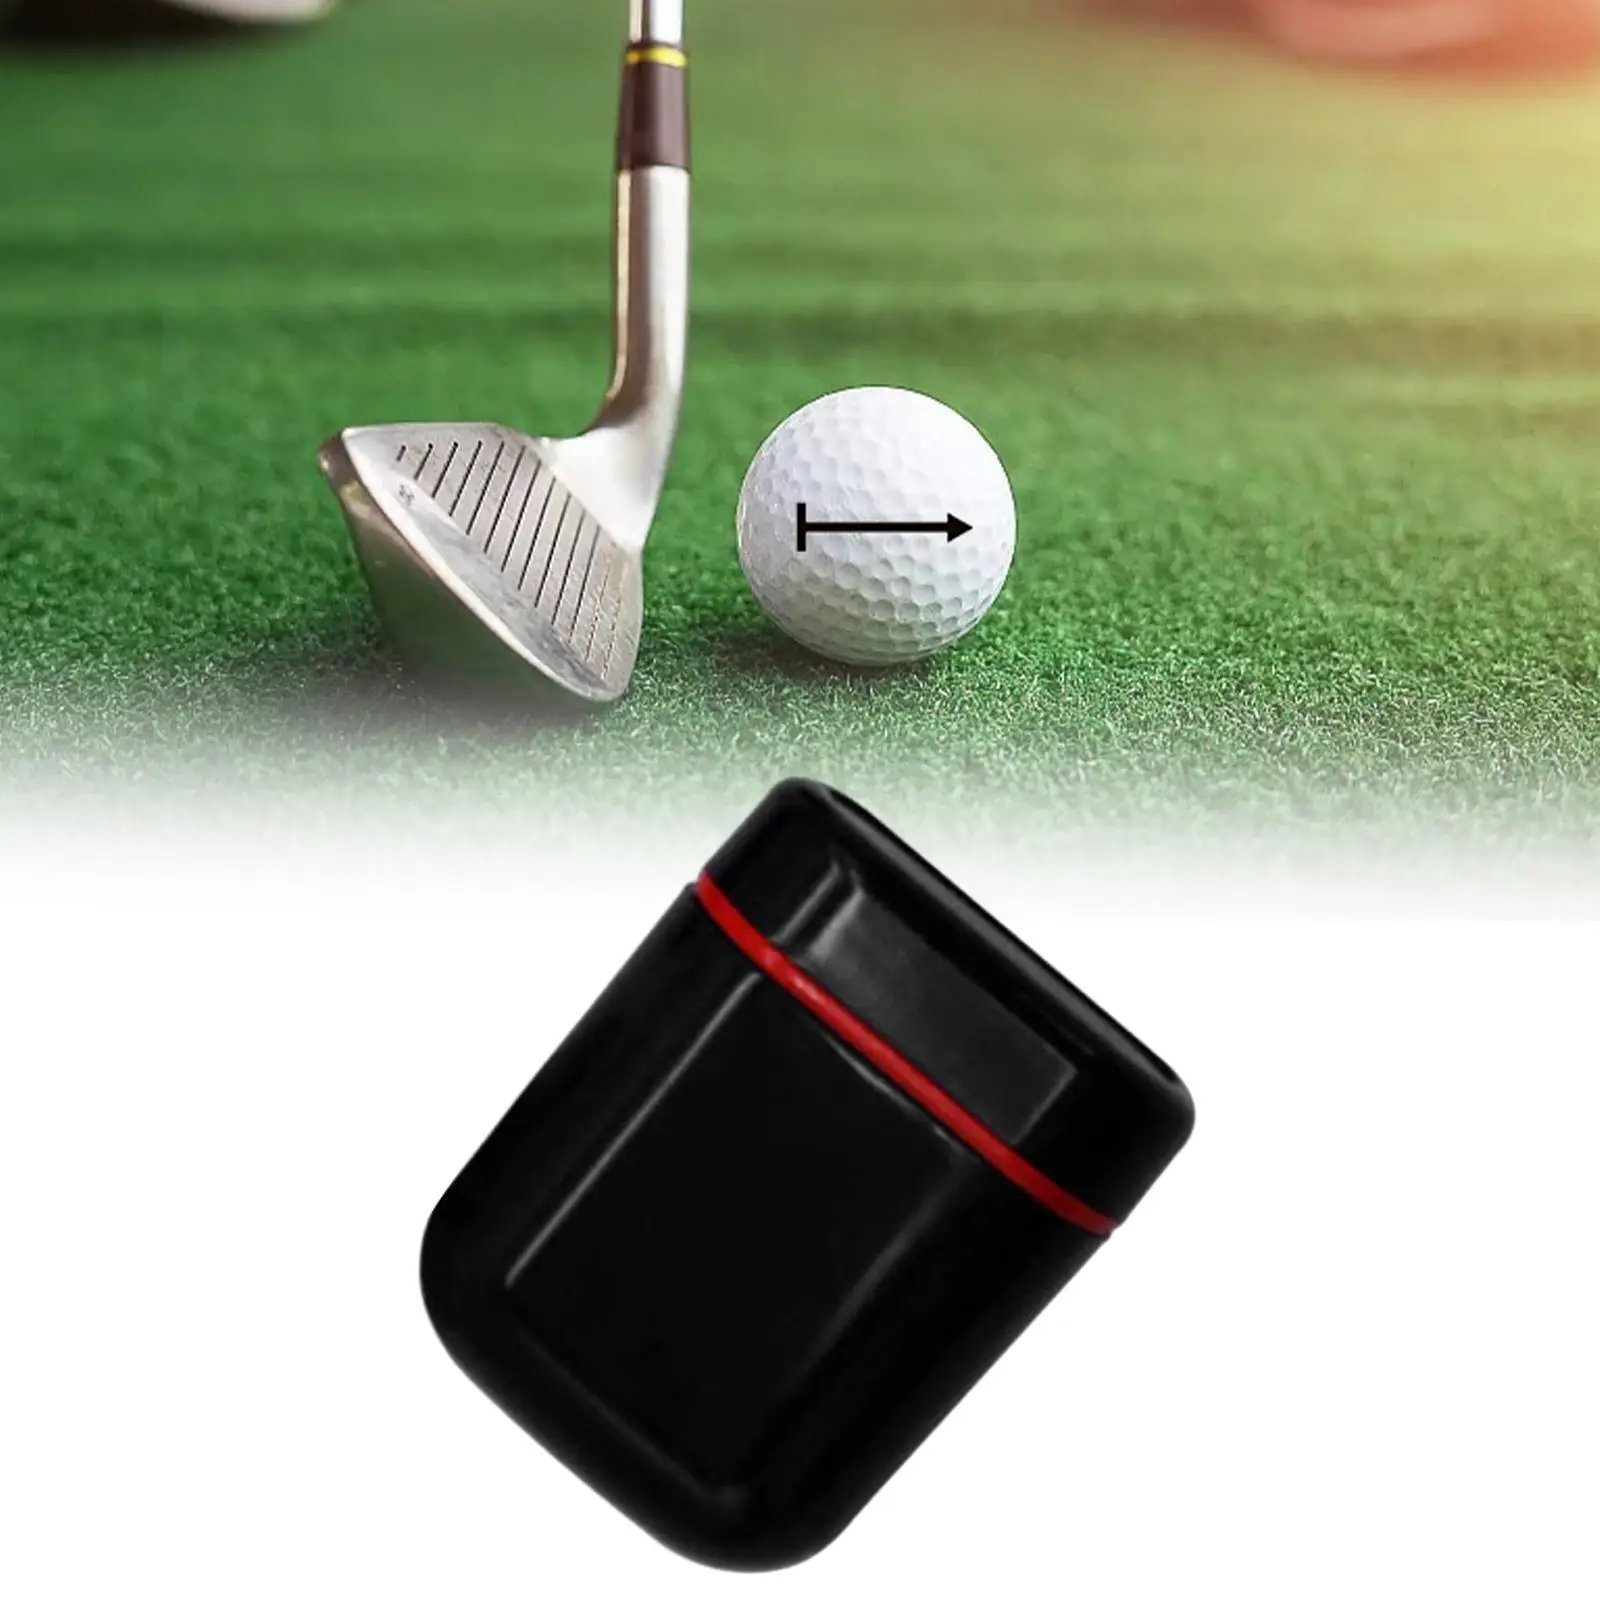 Ball Marking Golf Alignment Quick Drying Golf Accessories Impression Stamp Marker for Birthday Gift Training Golfer